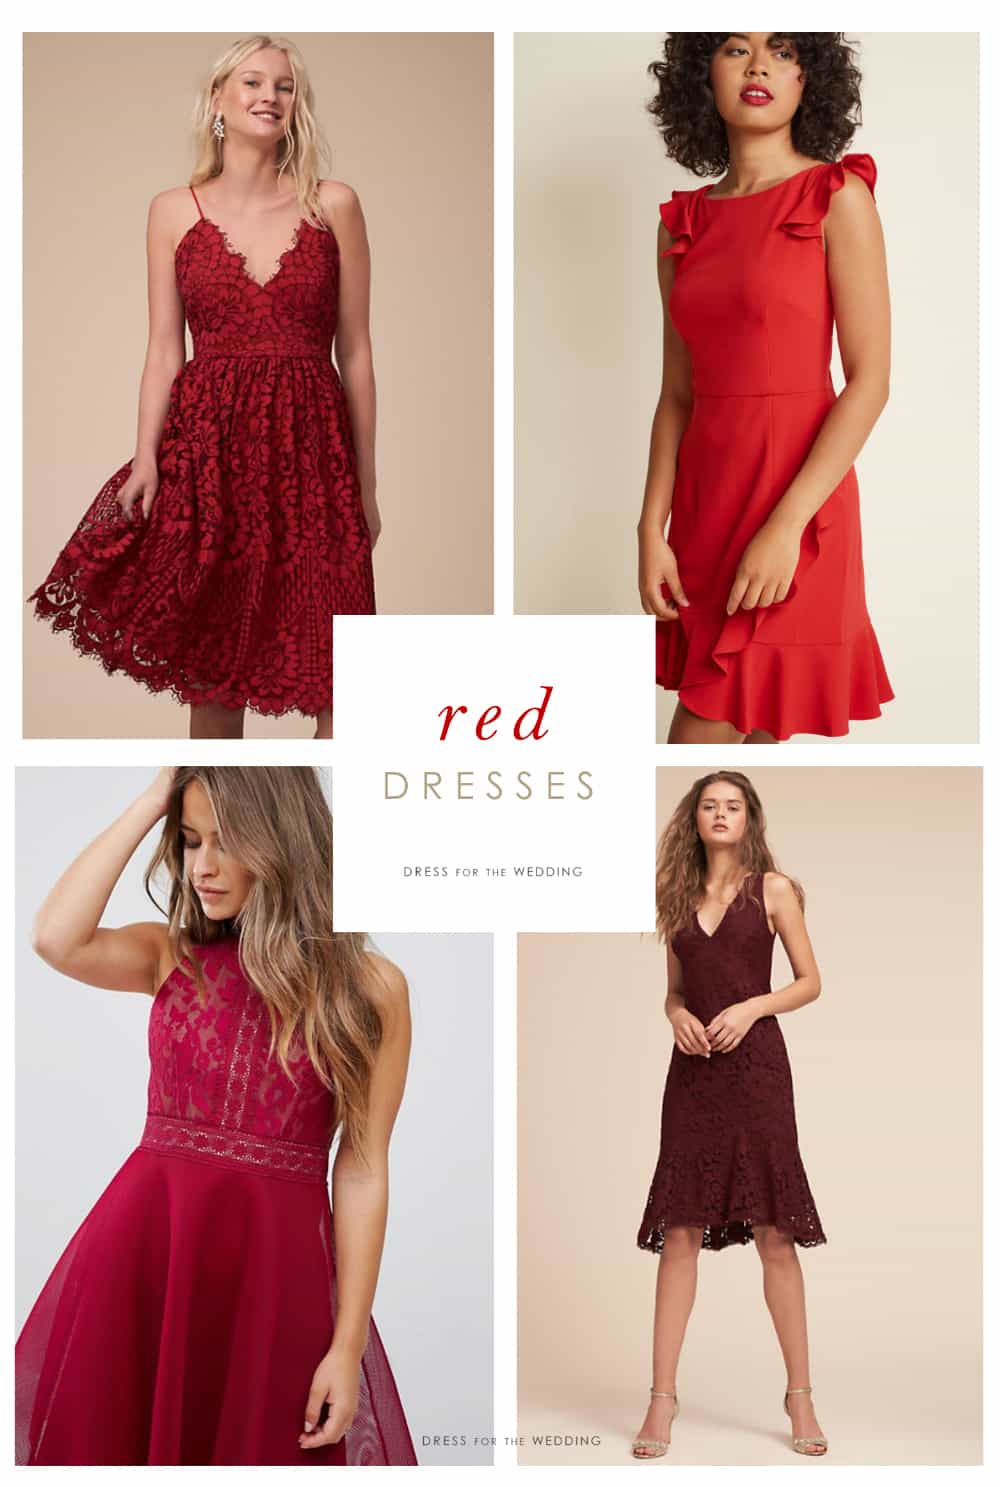 black and red dresses for weddings